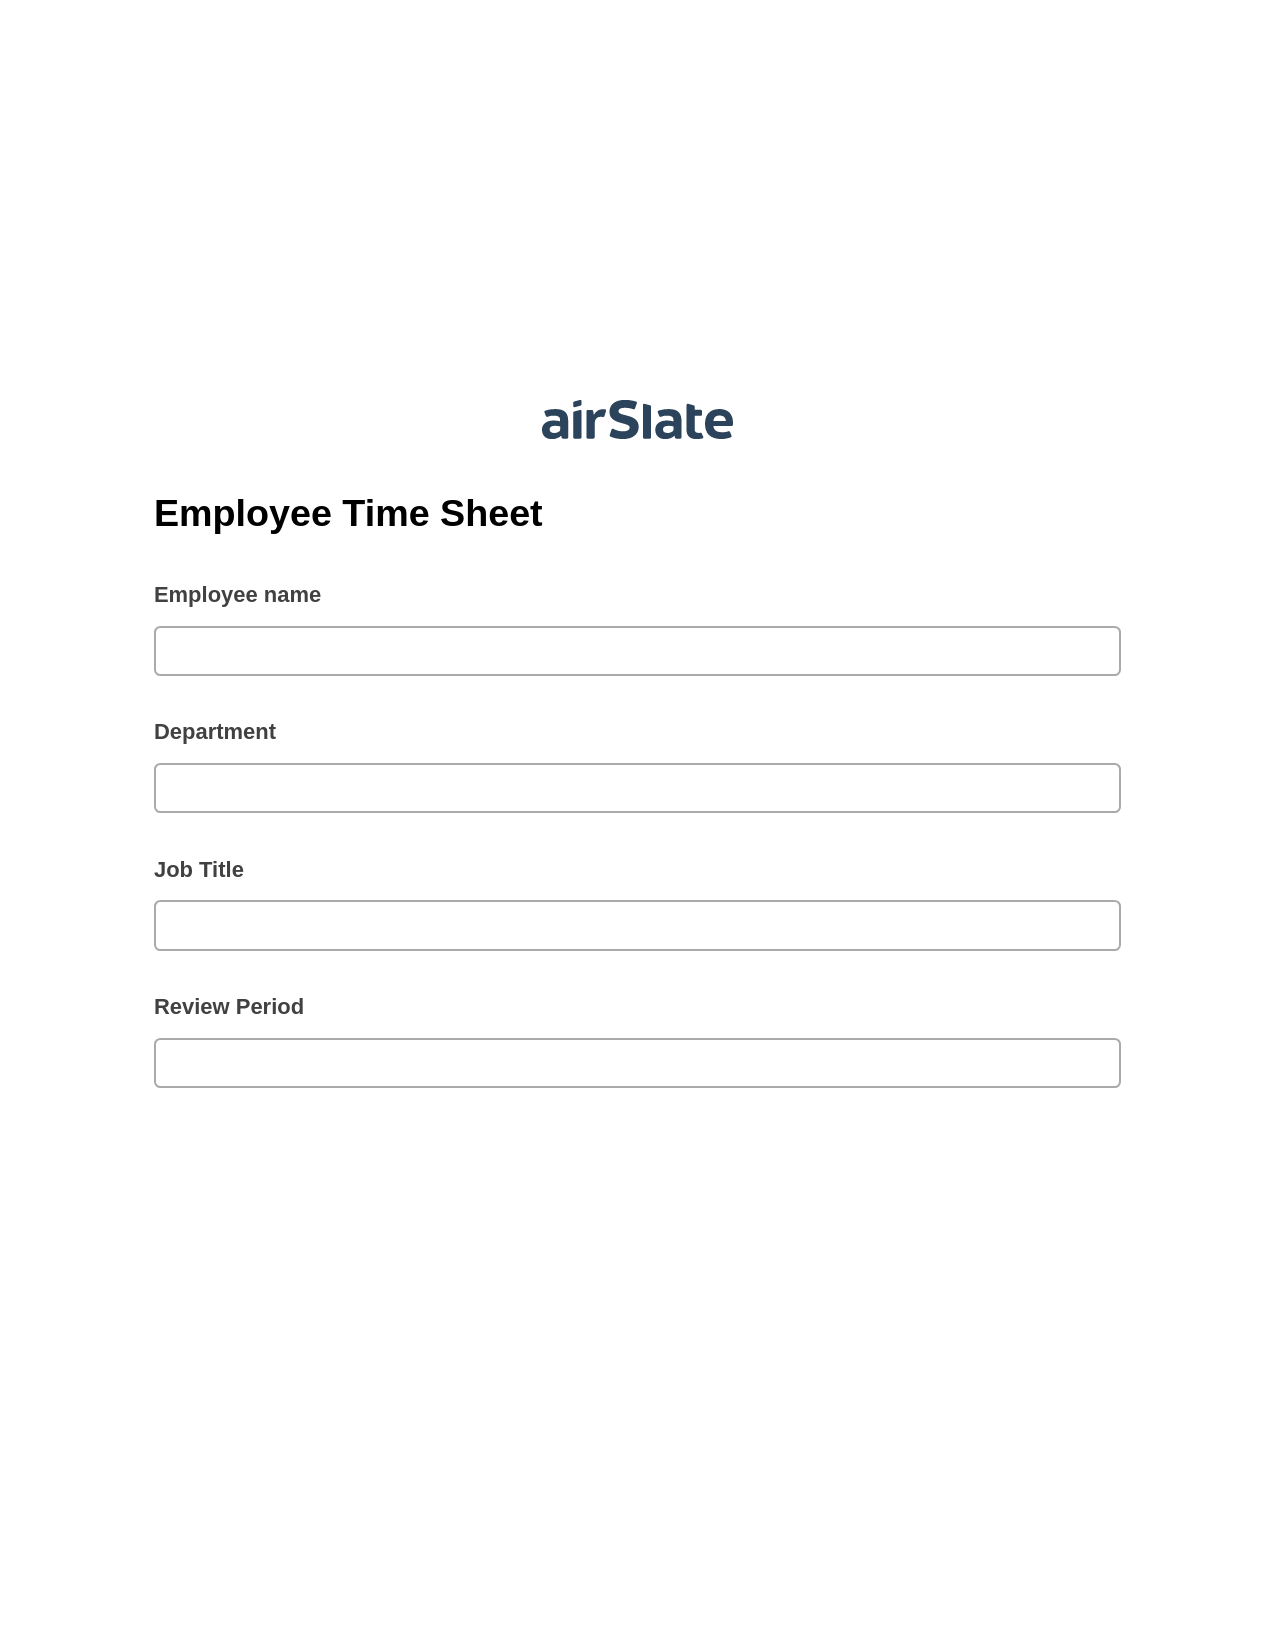 Multirole Employee Time Sheet Pre-fill from MS Dynamics 365 Records, Update MS Dynamics 365 Record Bot, Export to NetSuite Bot